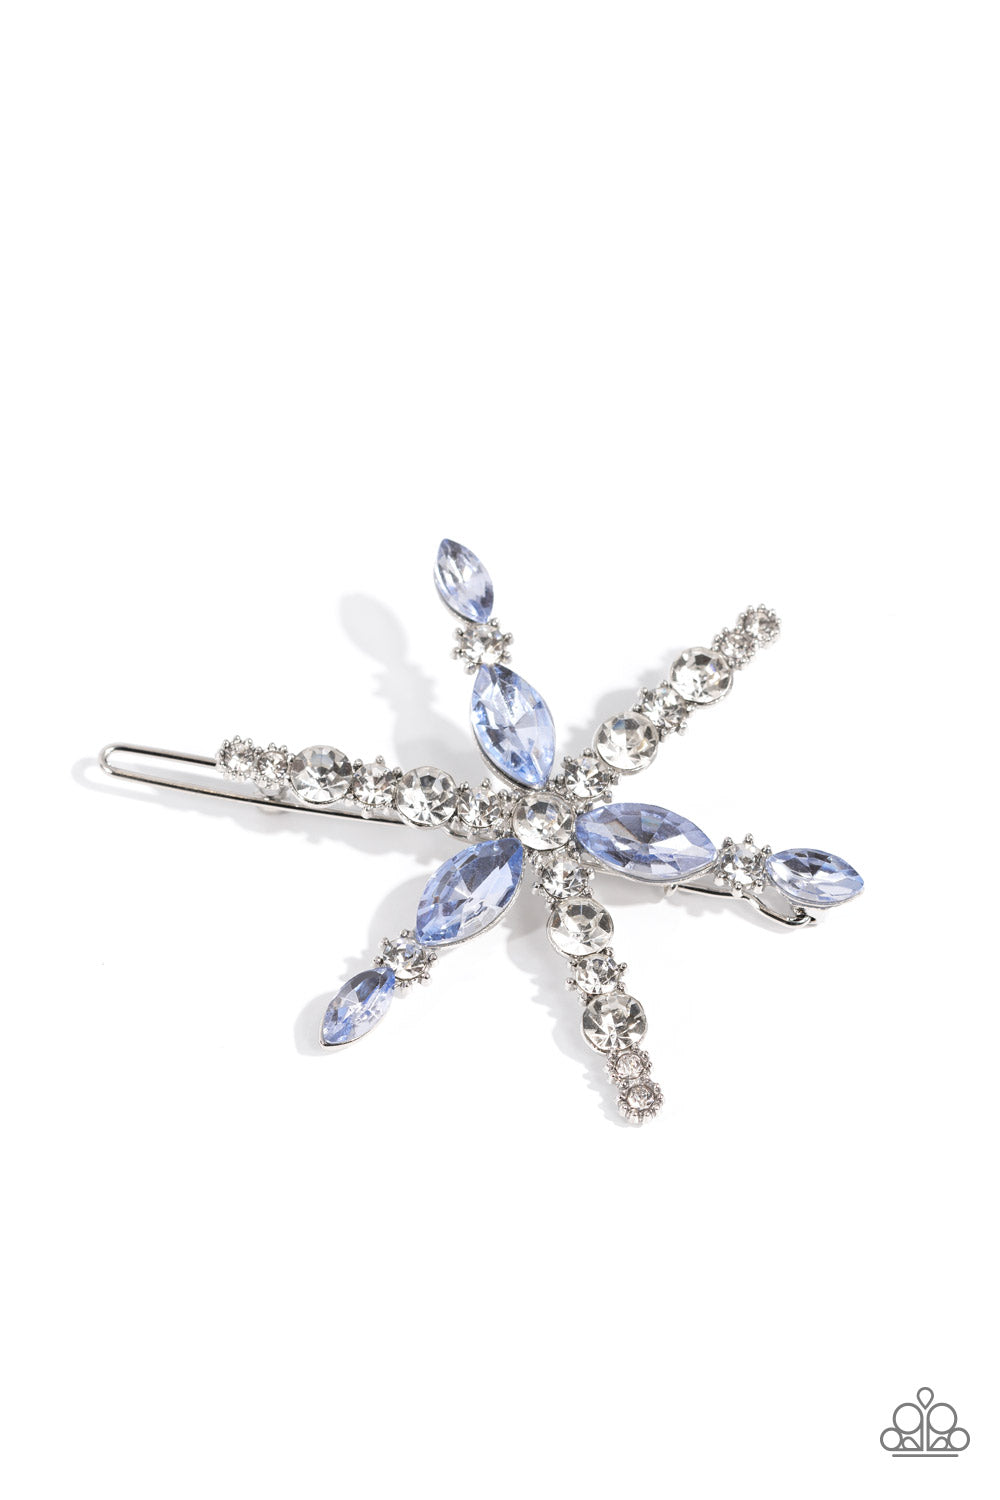 A magically mismatched collection of white round and blue marquise cut rhinestones adorn dainty silver bars that flare out into a stellar centerpiece. Features a clamp barrette closure.  Sold as one individual hair clip.